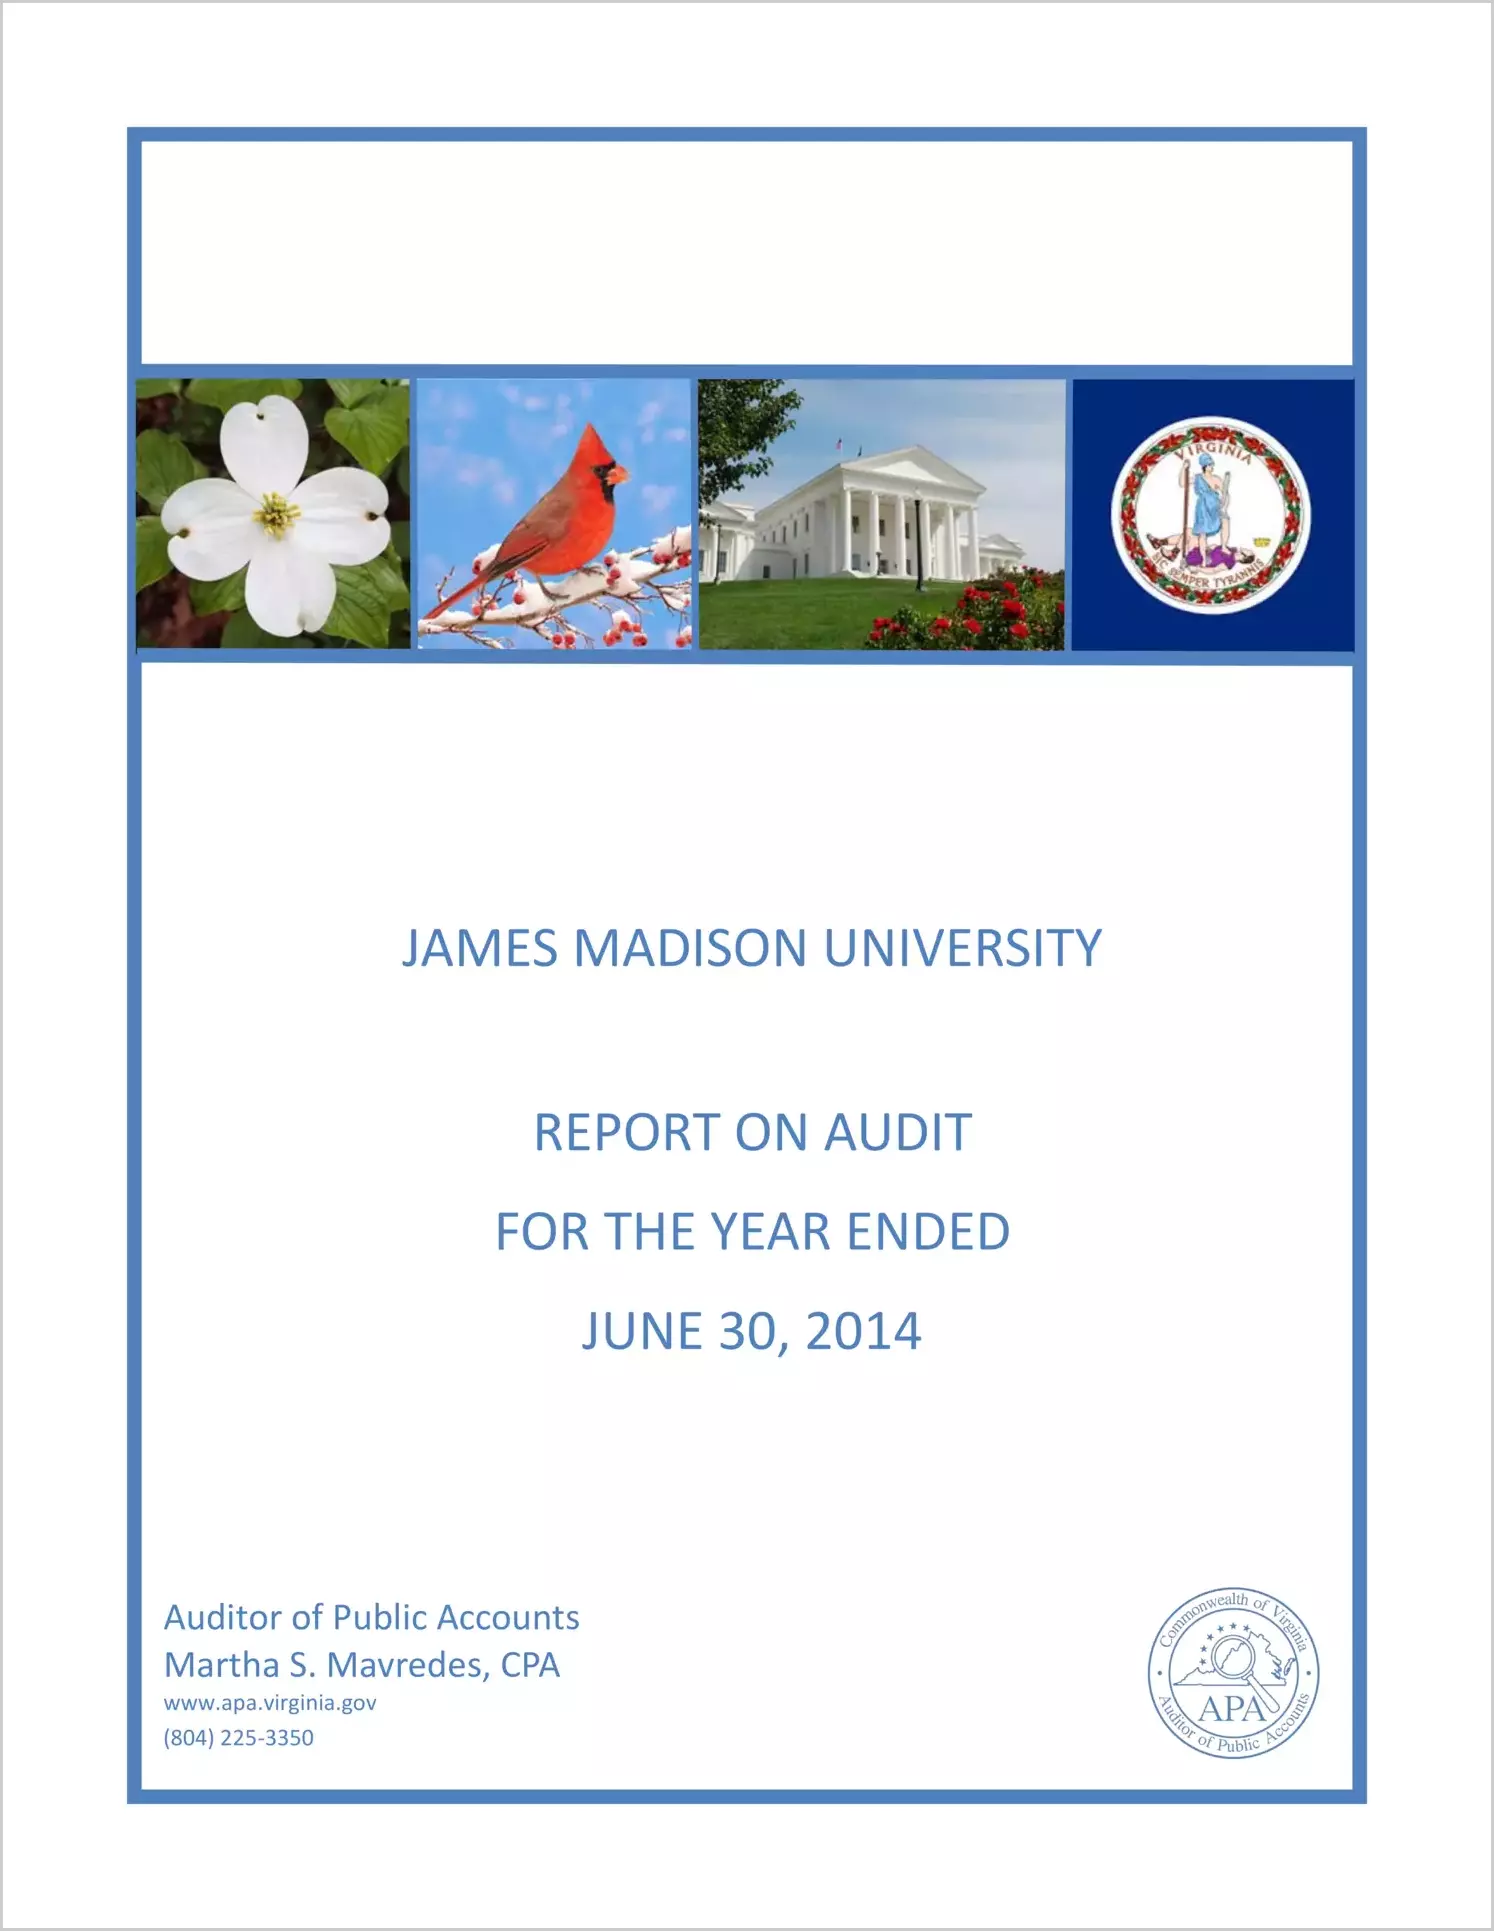 James Madison University for the year ended June 30, 2014